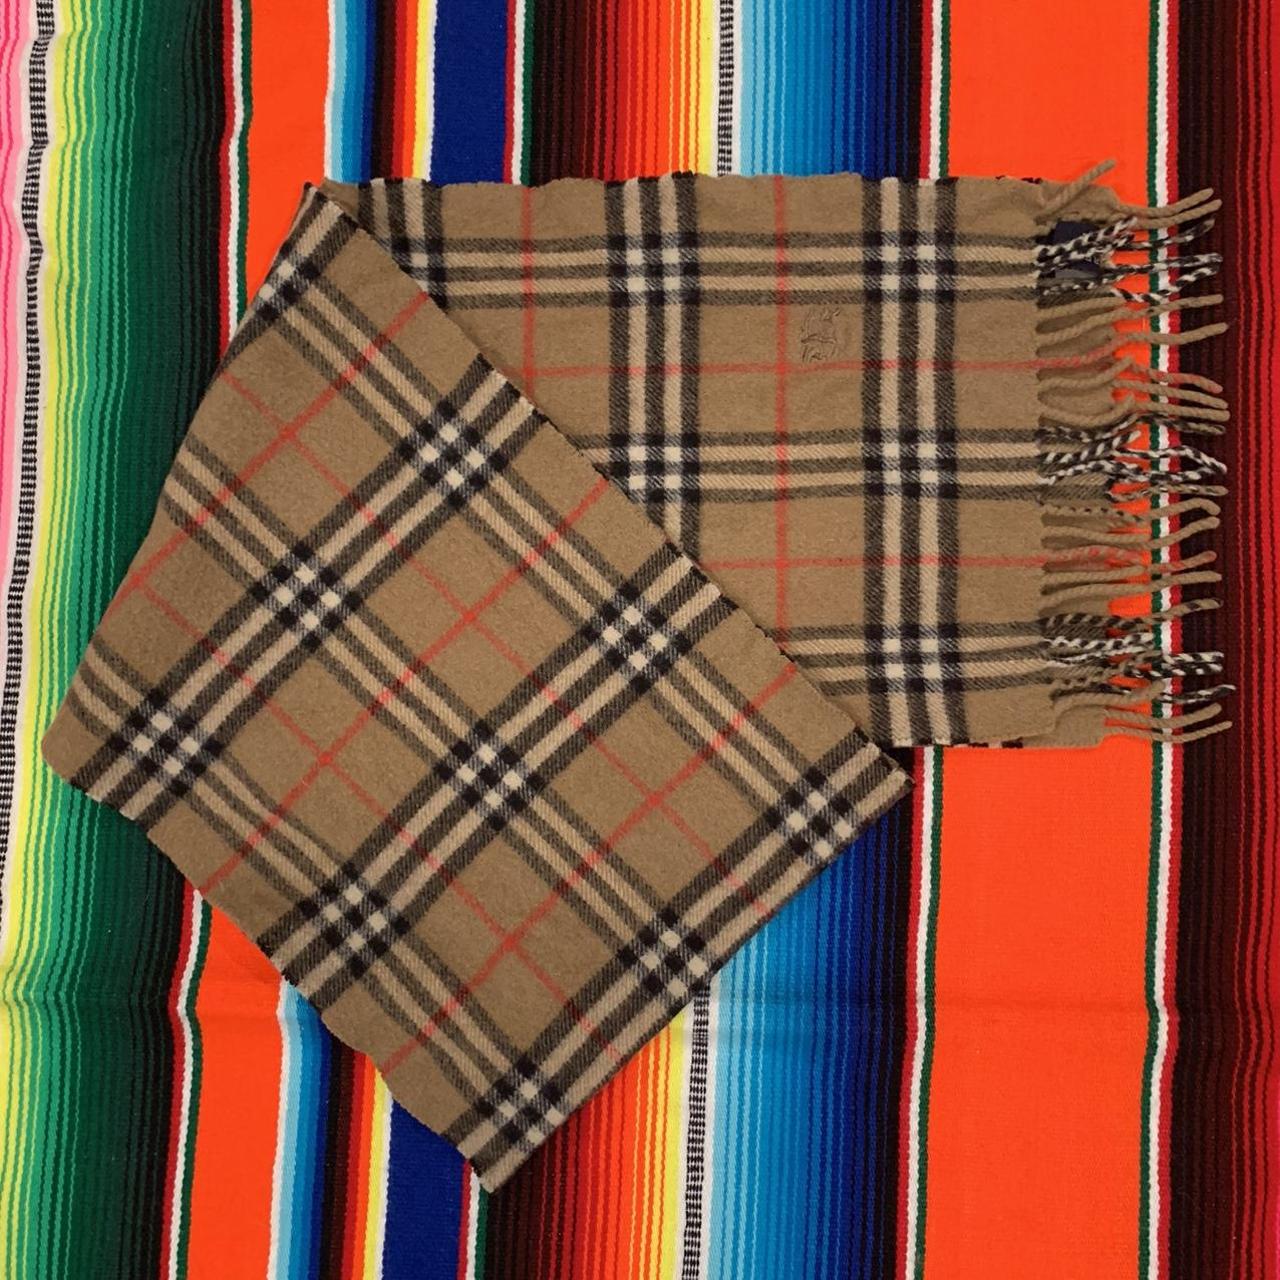 Burberry Scarf Authentic 